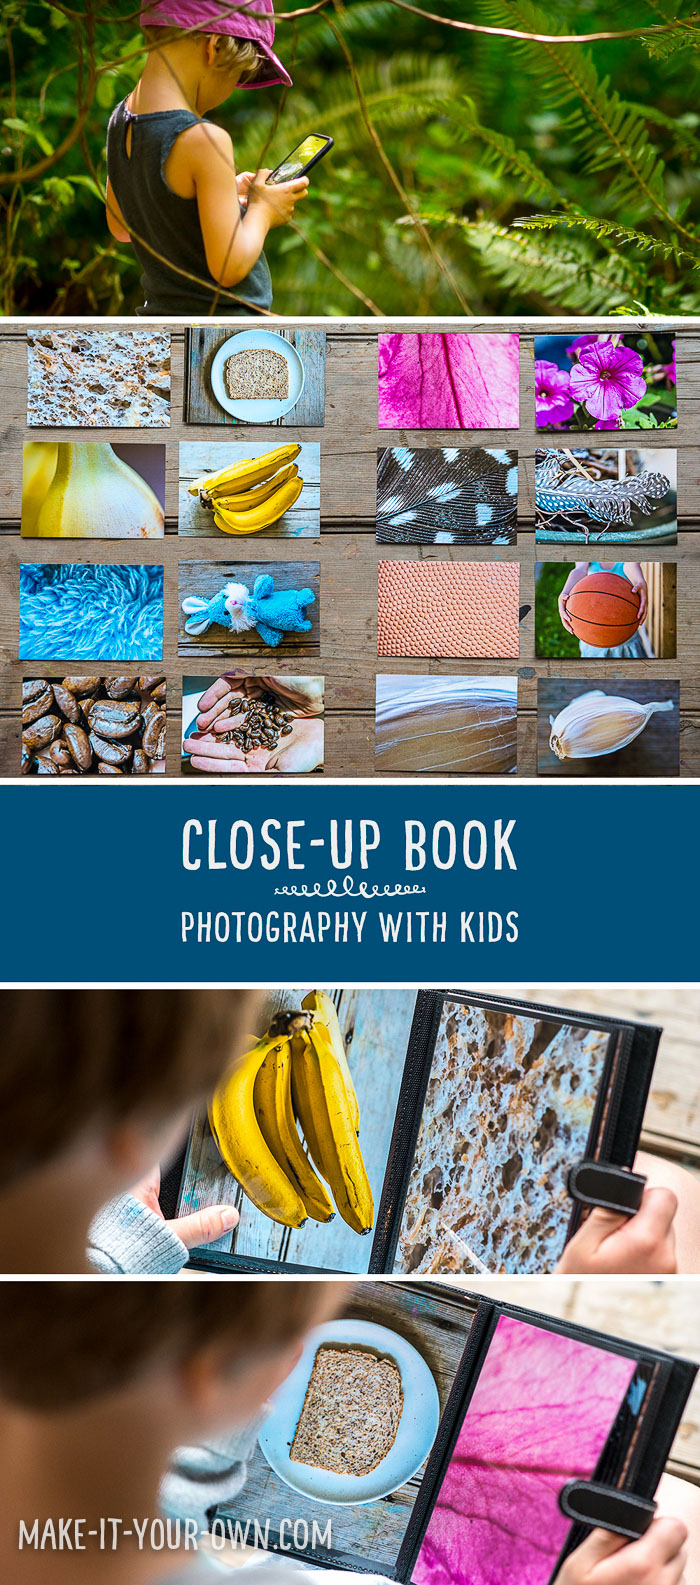 Photography with Kids: How to Make a Close-Up Book.  If your children or students are interested in digital media photography skills are an important component and this book allows them to work on zooming in and out to form a challenge for their friends!